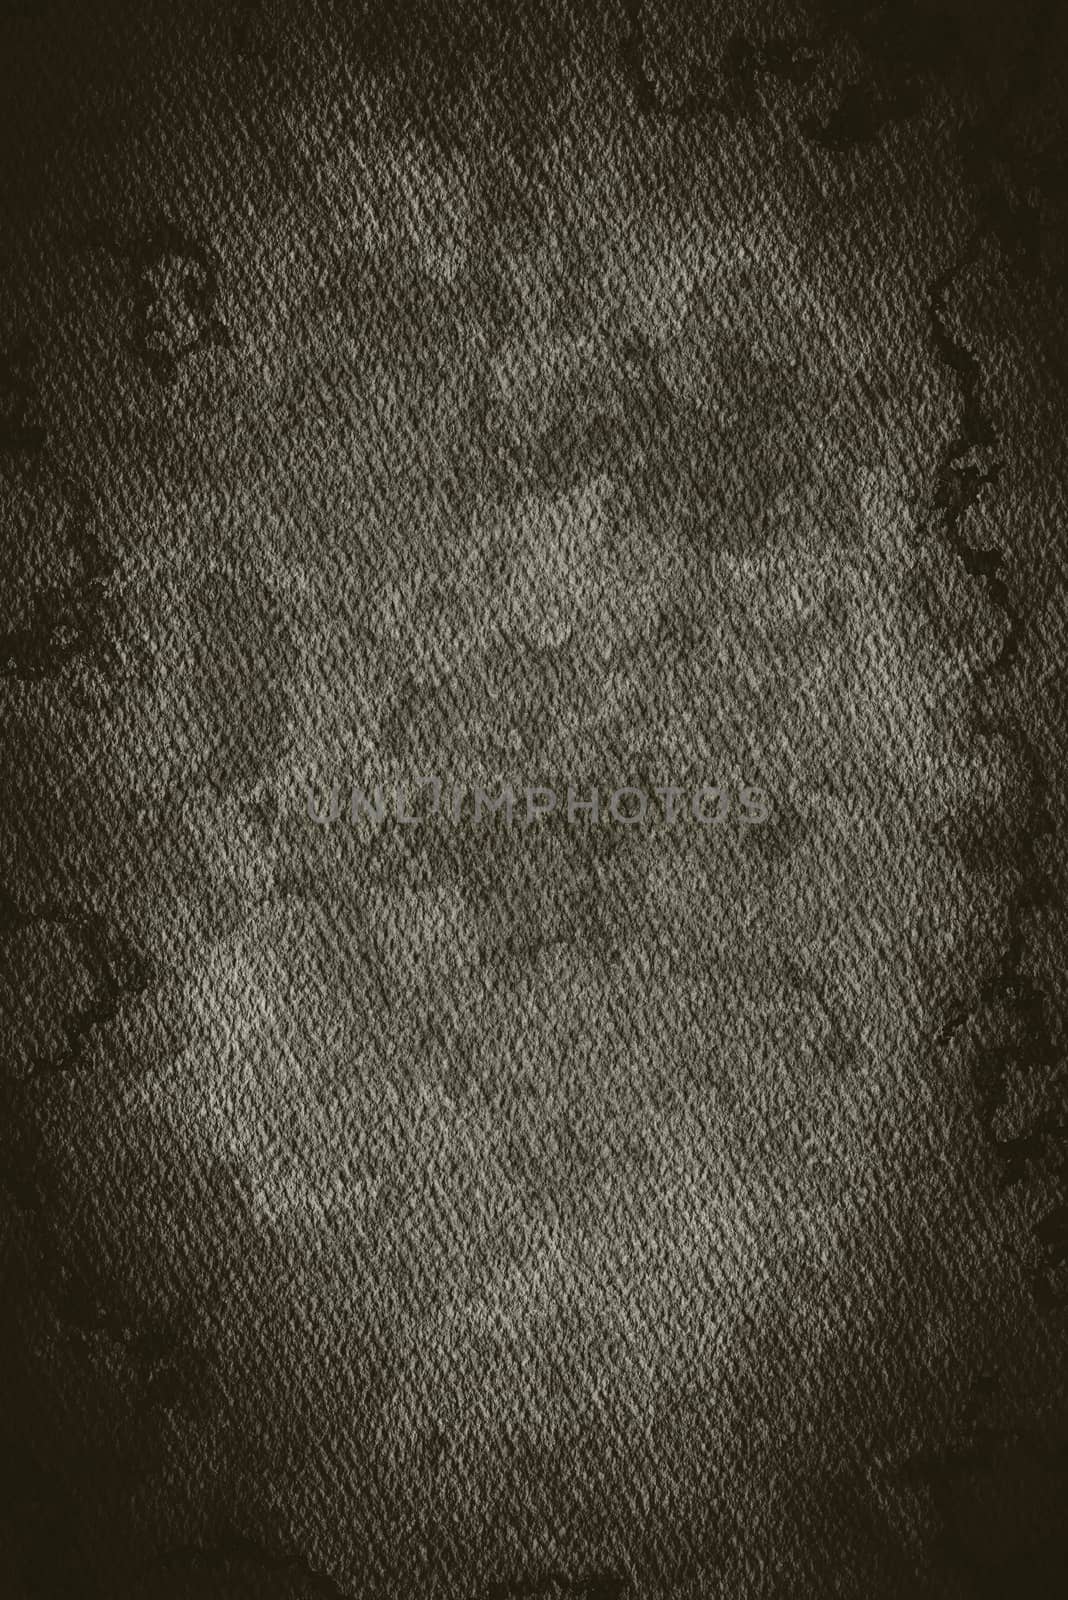 Old paper texture or background